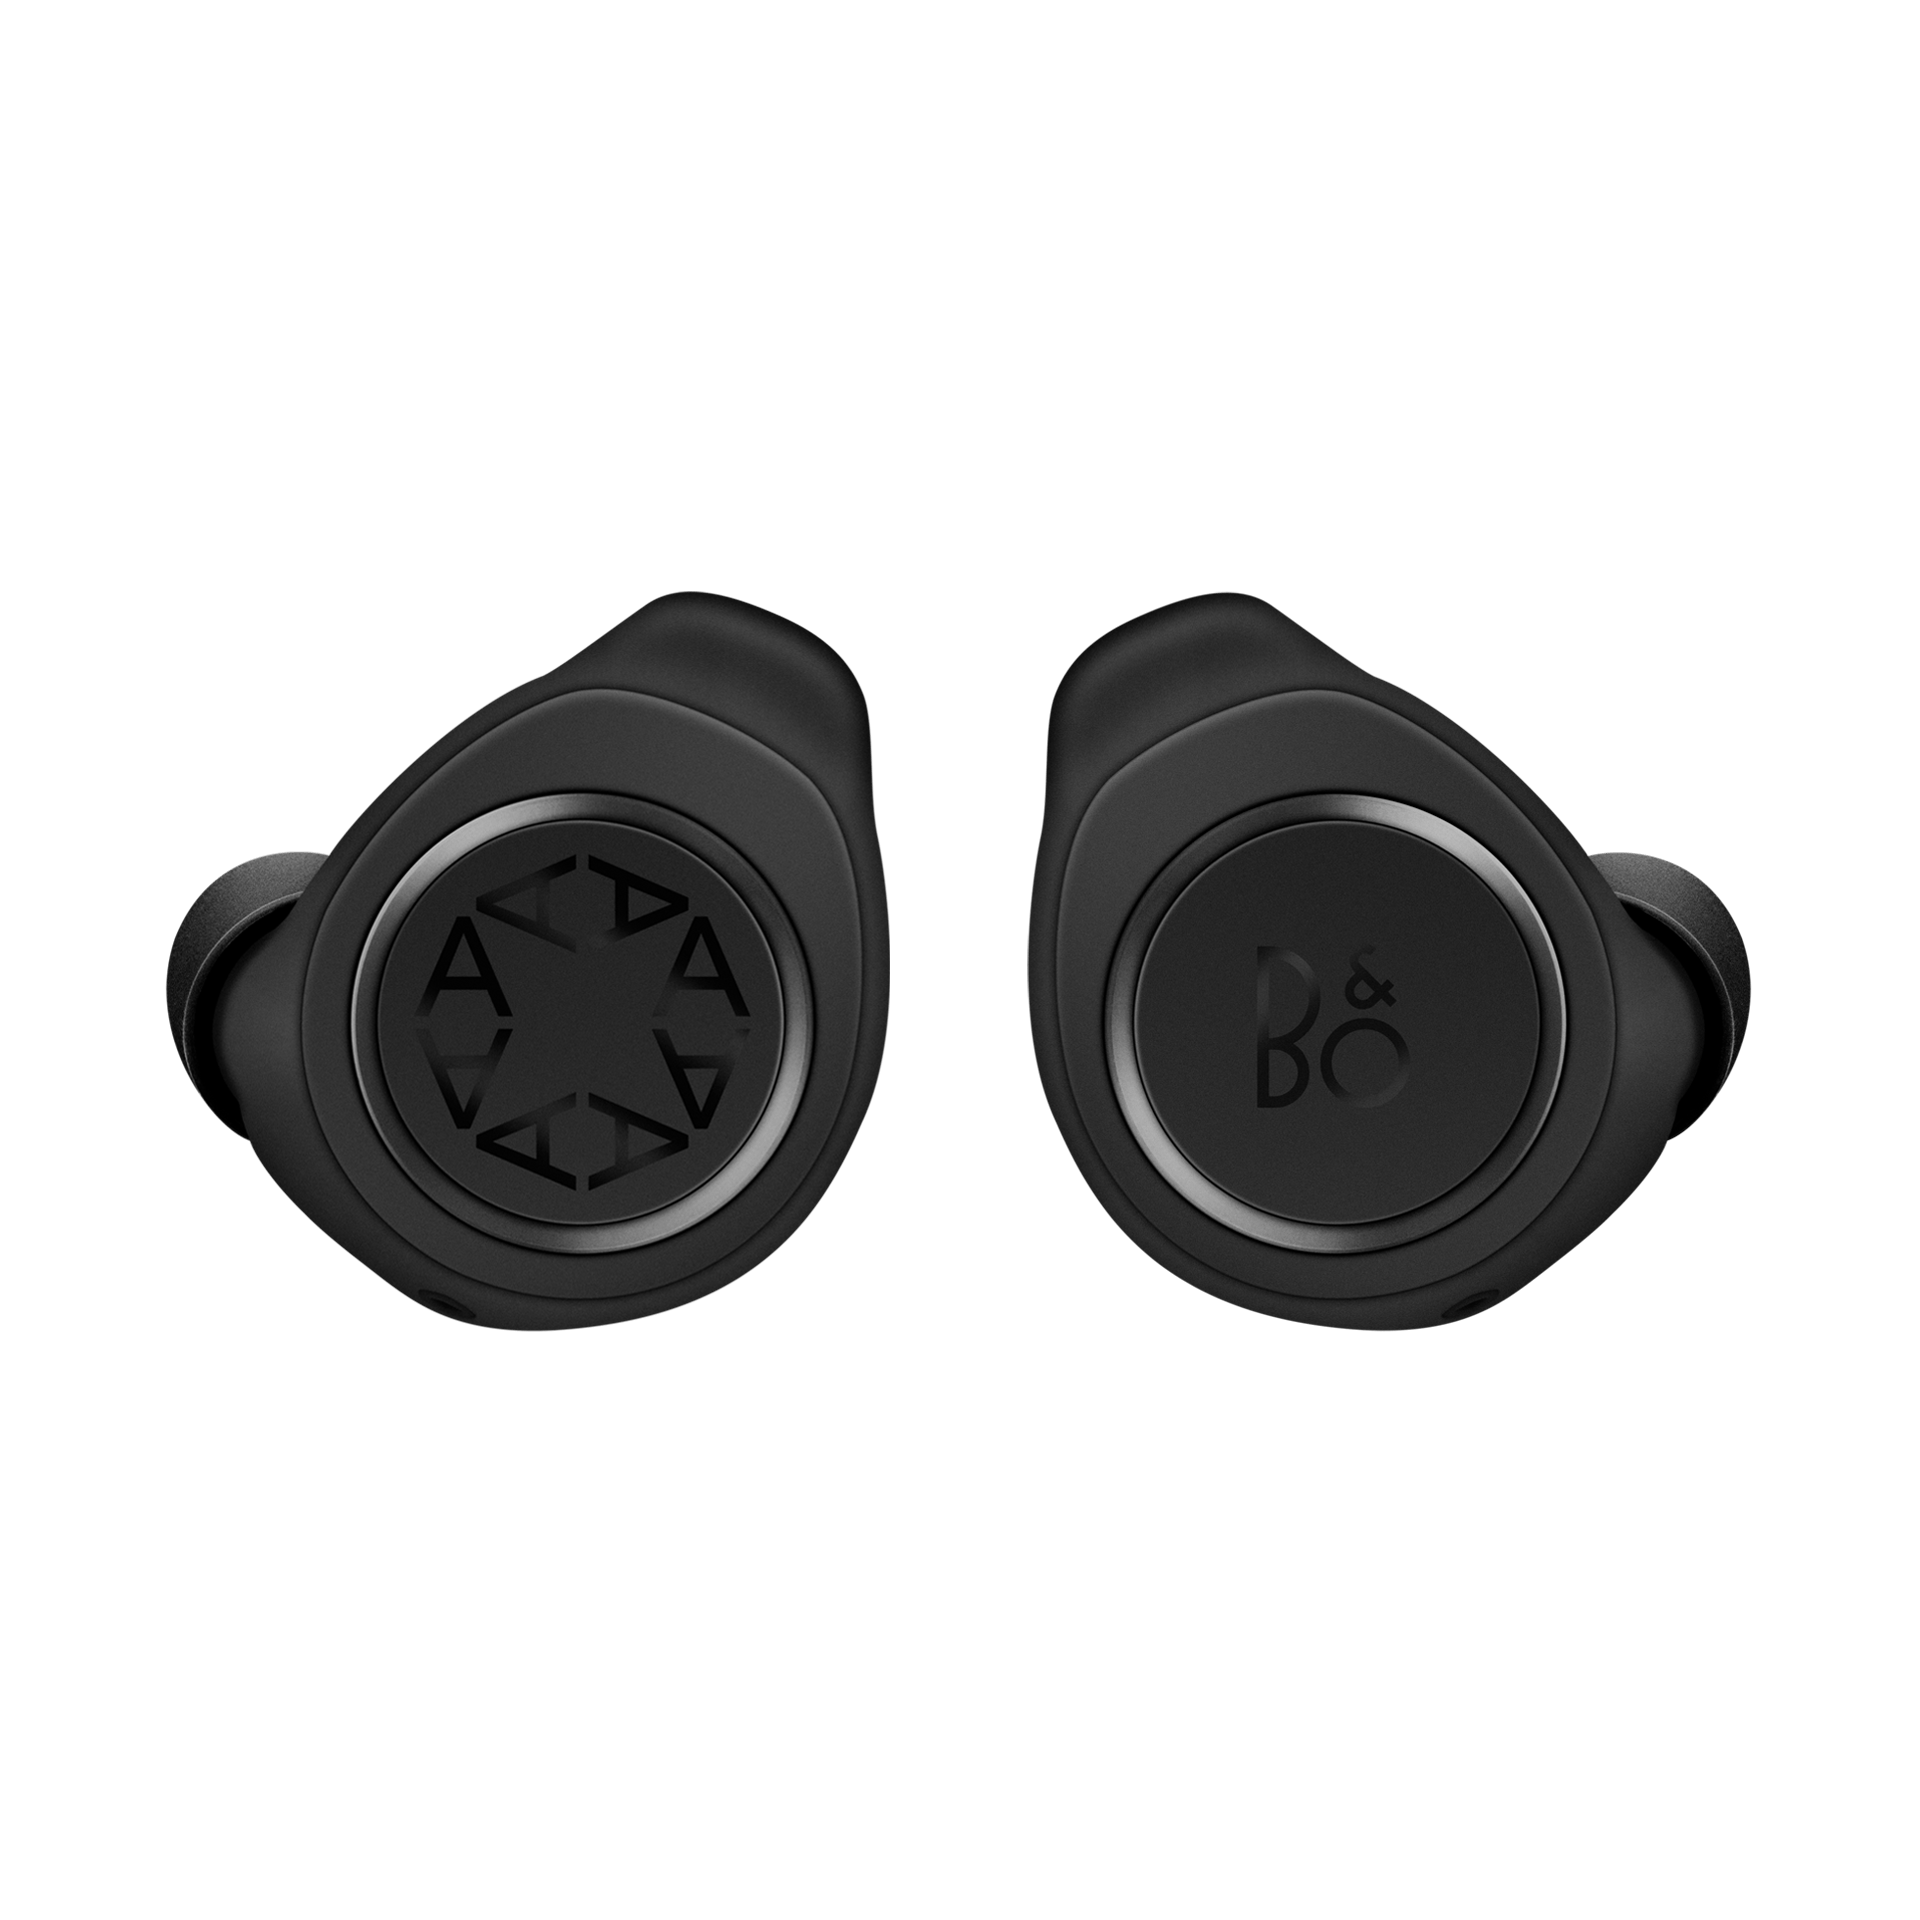 Alyx puts an industrial spin on Bang & Olufsen's wireless earphones